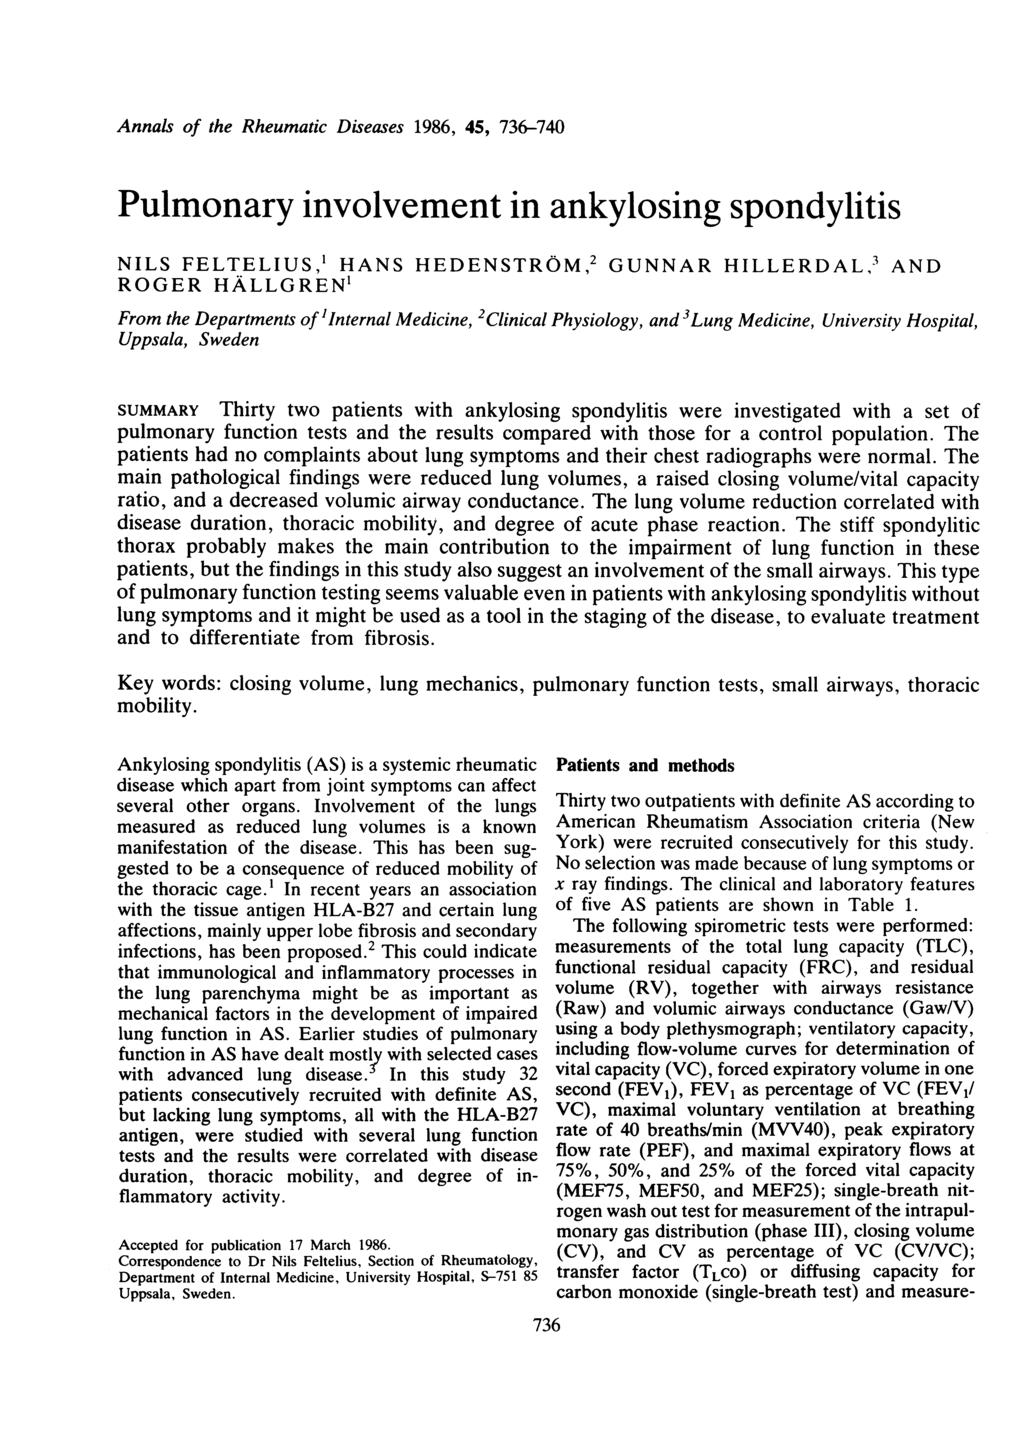 Annals of the Rheumatic Diseases 1986, 45, 736-74 Pulmonary involvement in ankylosing spondylitis NILS FELTELIUS,1 HANS HEDENSTROM,2 GUNNAR HILLERDAL,3 AND ROGER HALLGREN' From the Departments of